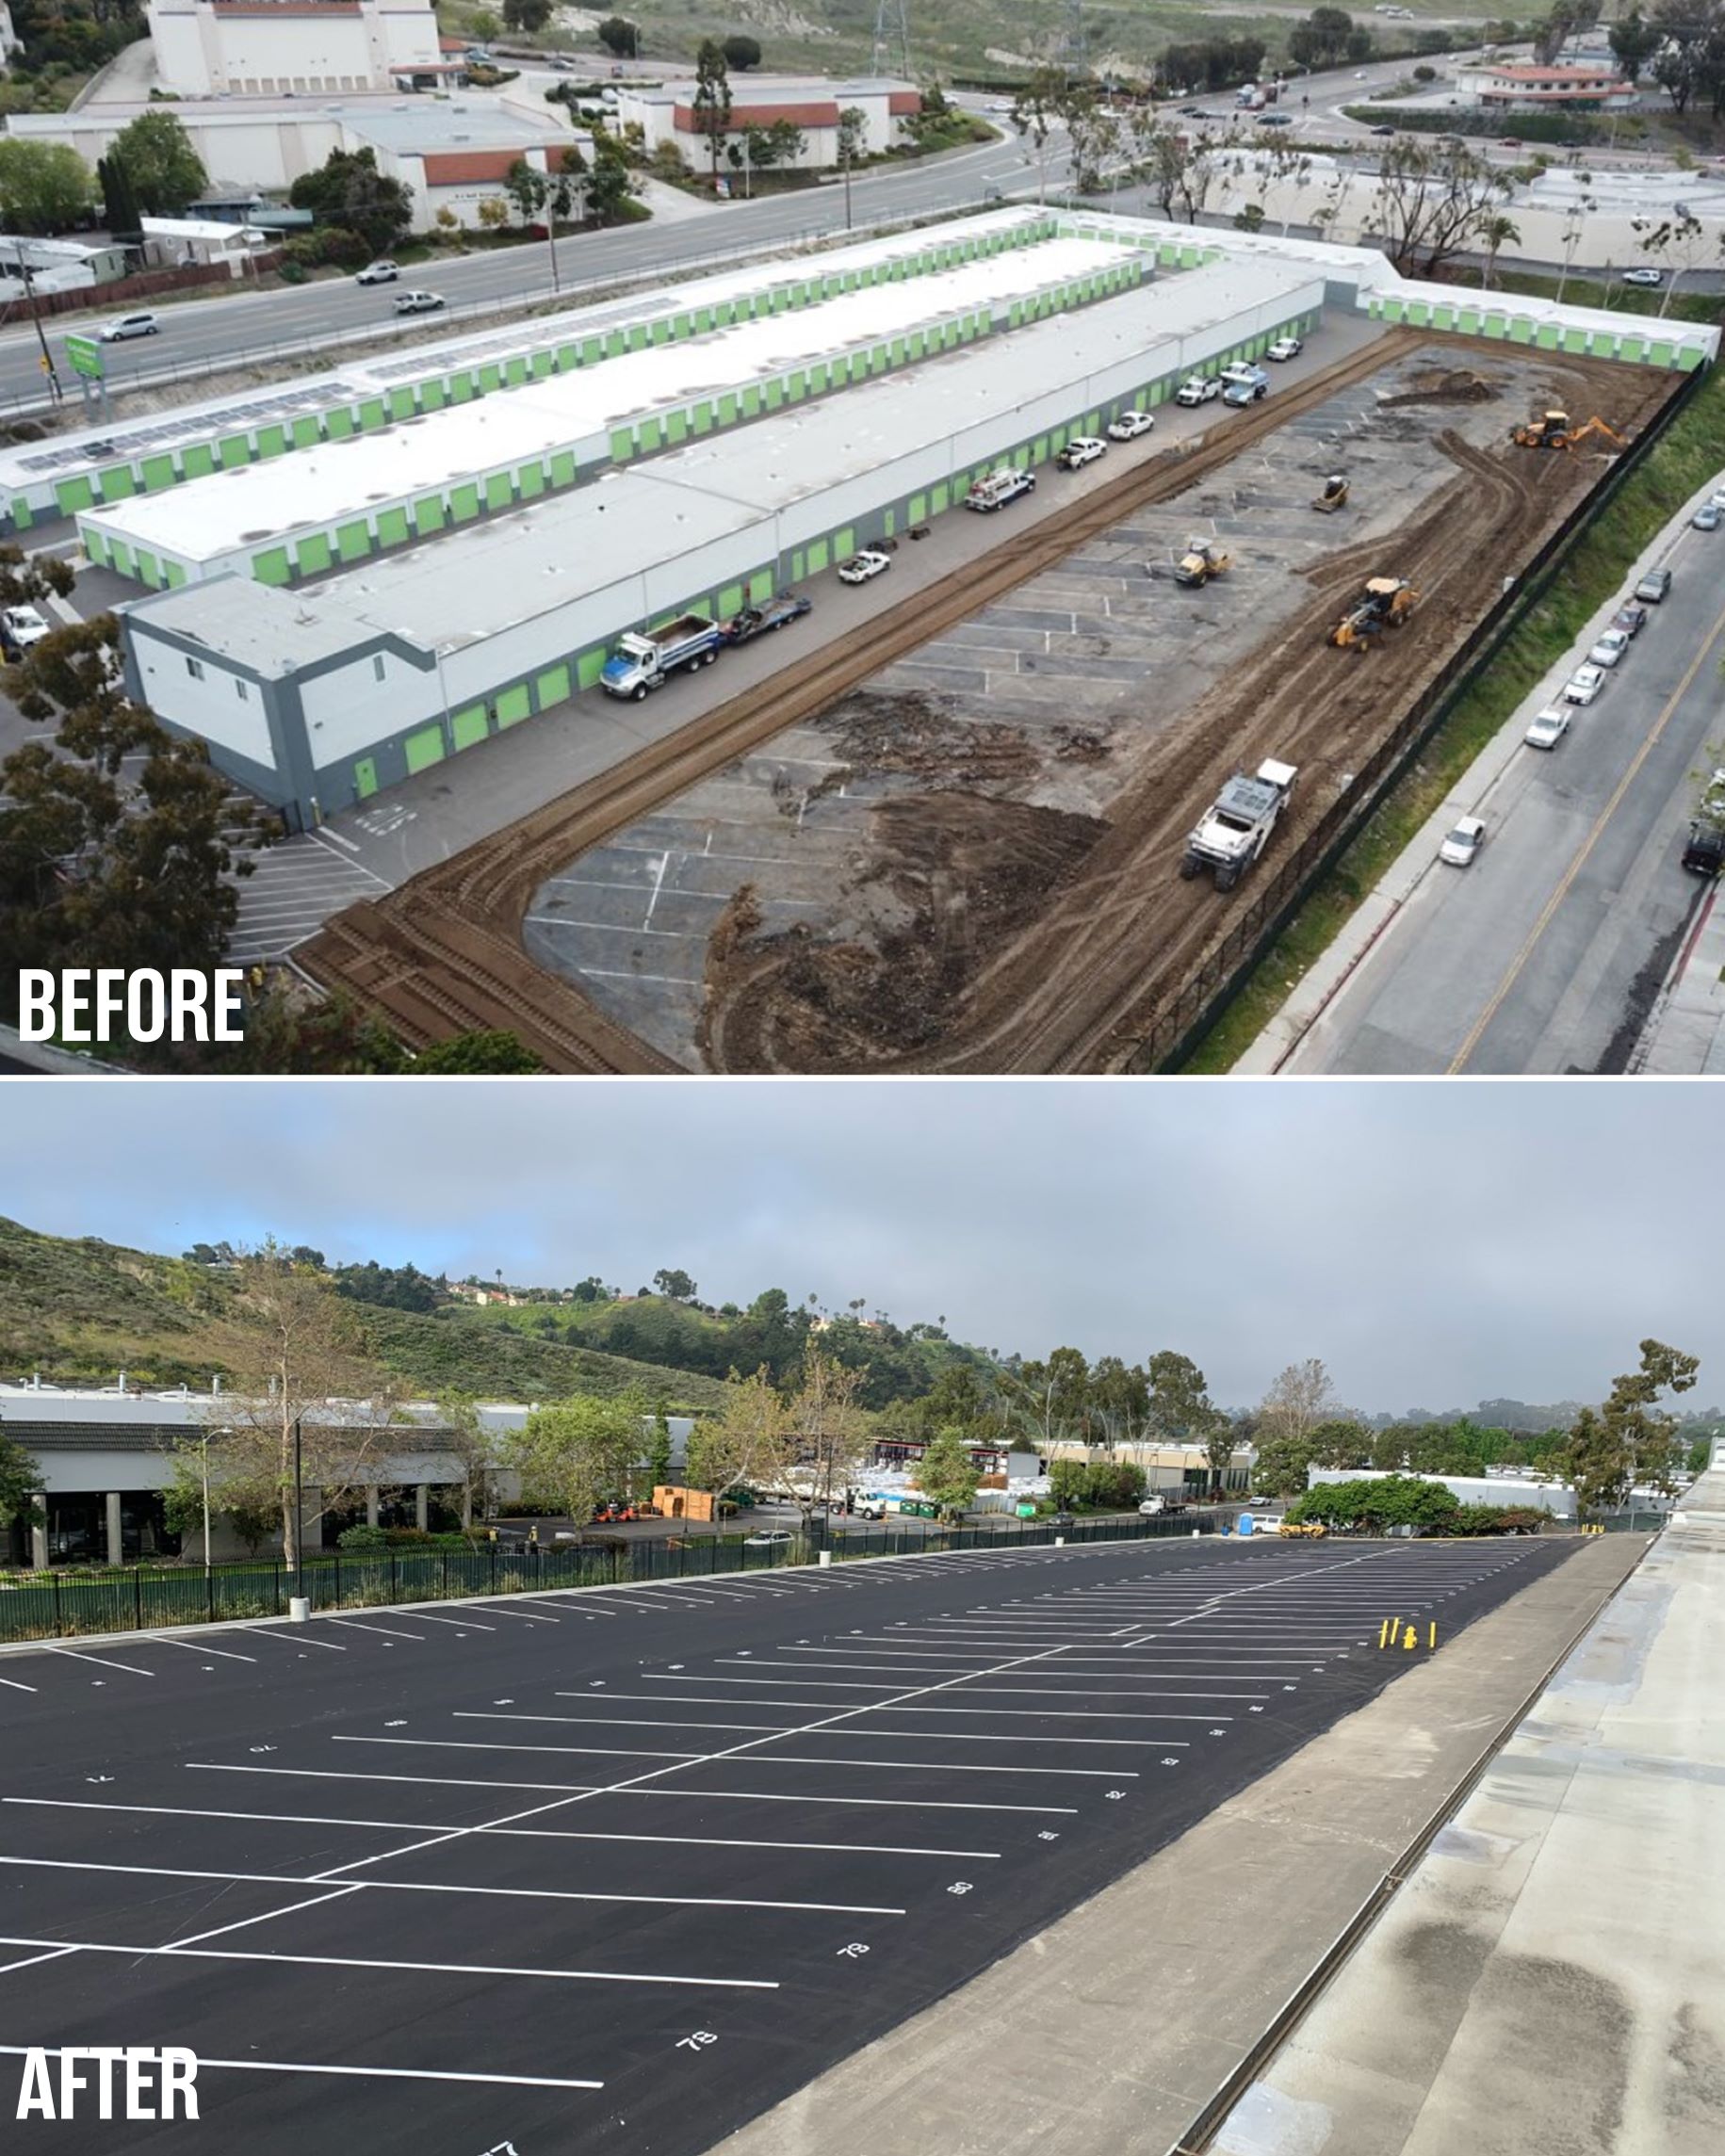 Before & After: Aerial Photos of the New Vehicle Storage Parking Lot from the Extra Space Storage Oceanside Facility Expansion